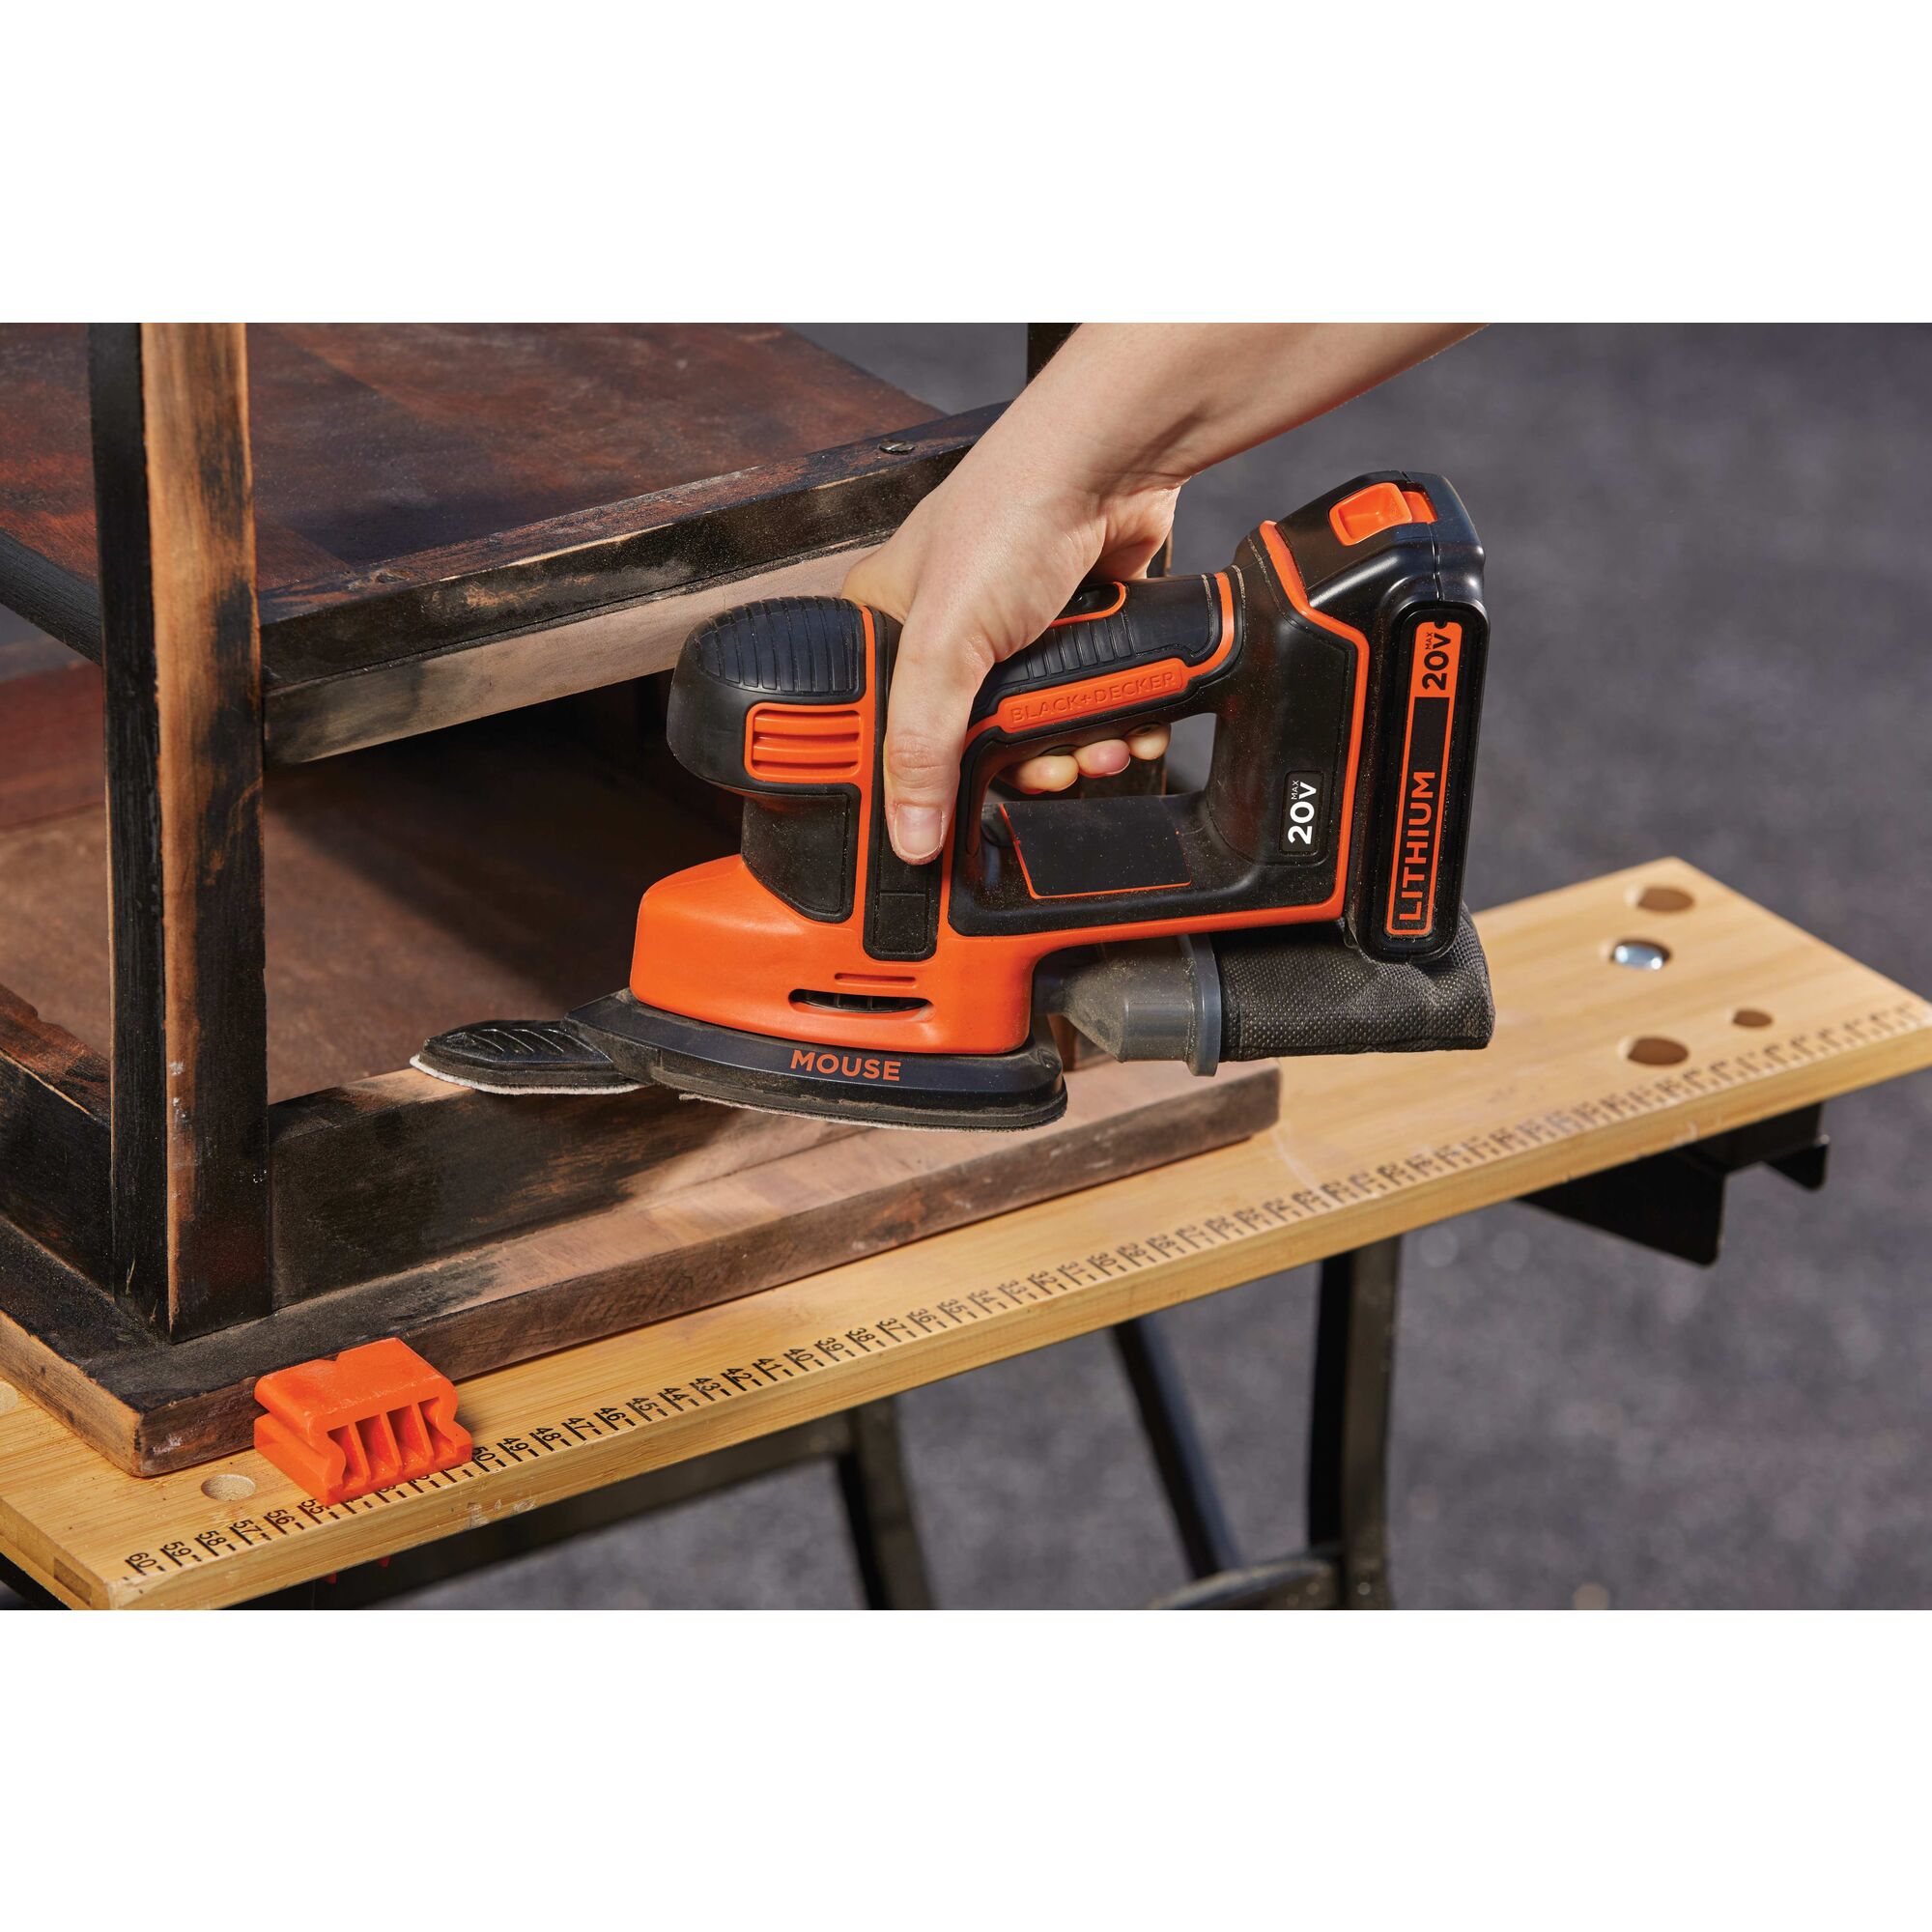 Close up of MOUSE Cordless Sander being used by person to sand wooden stool.